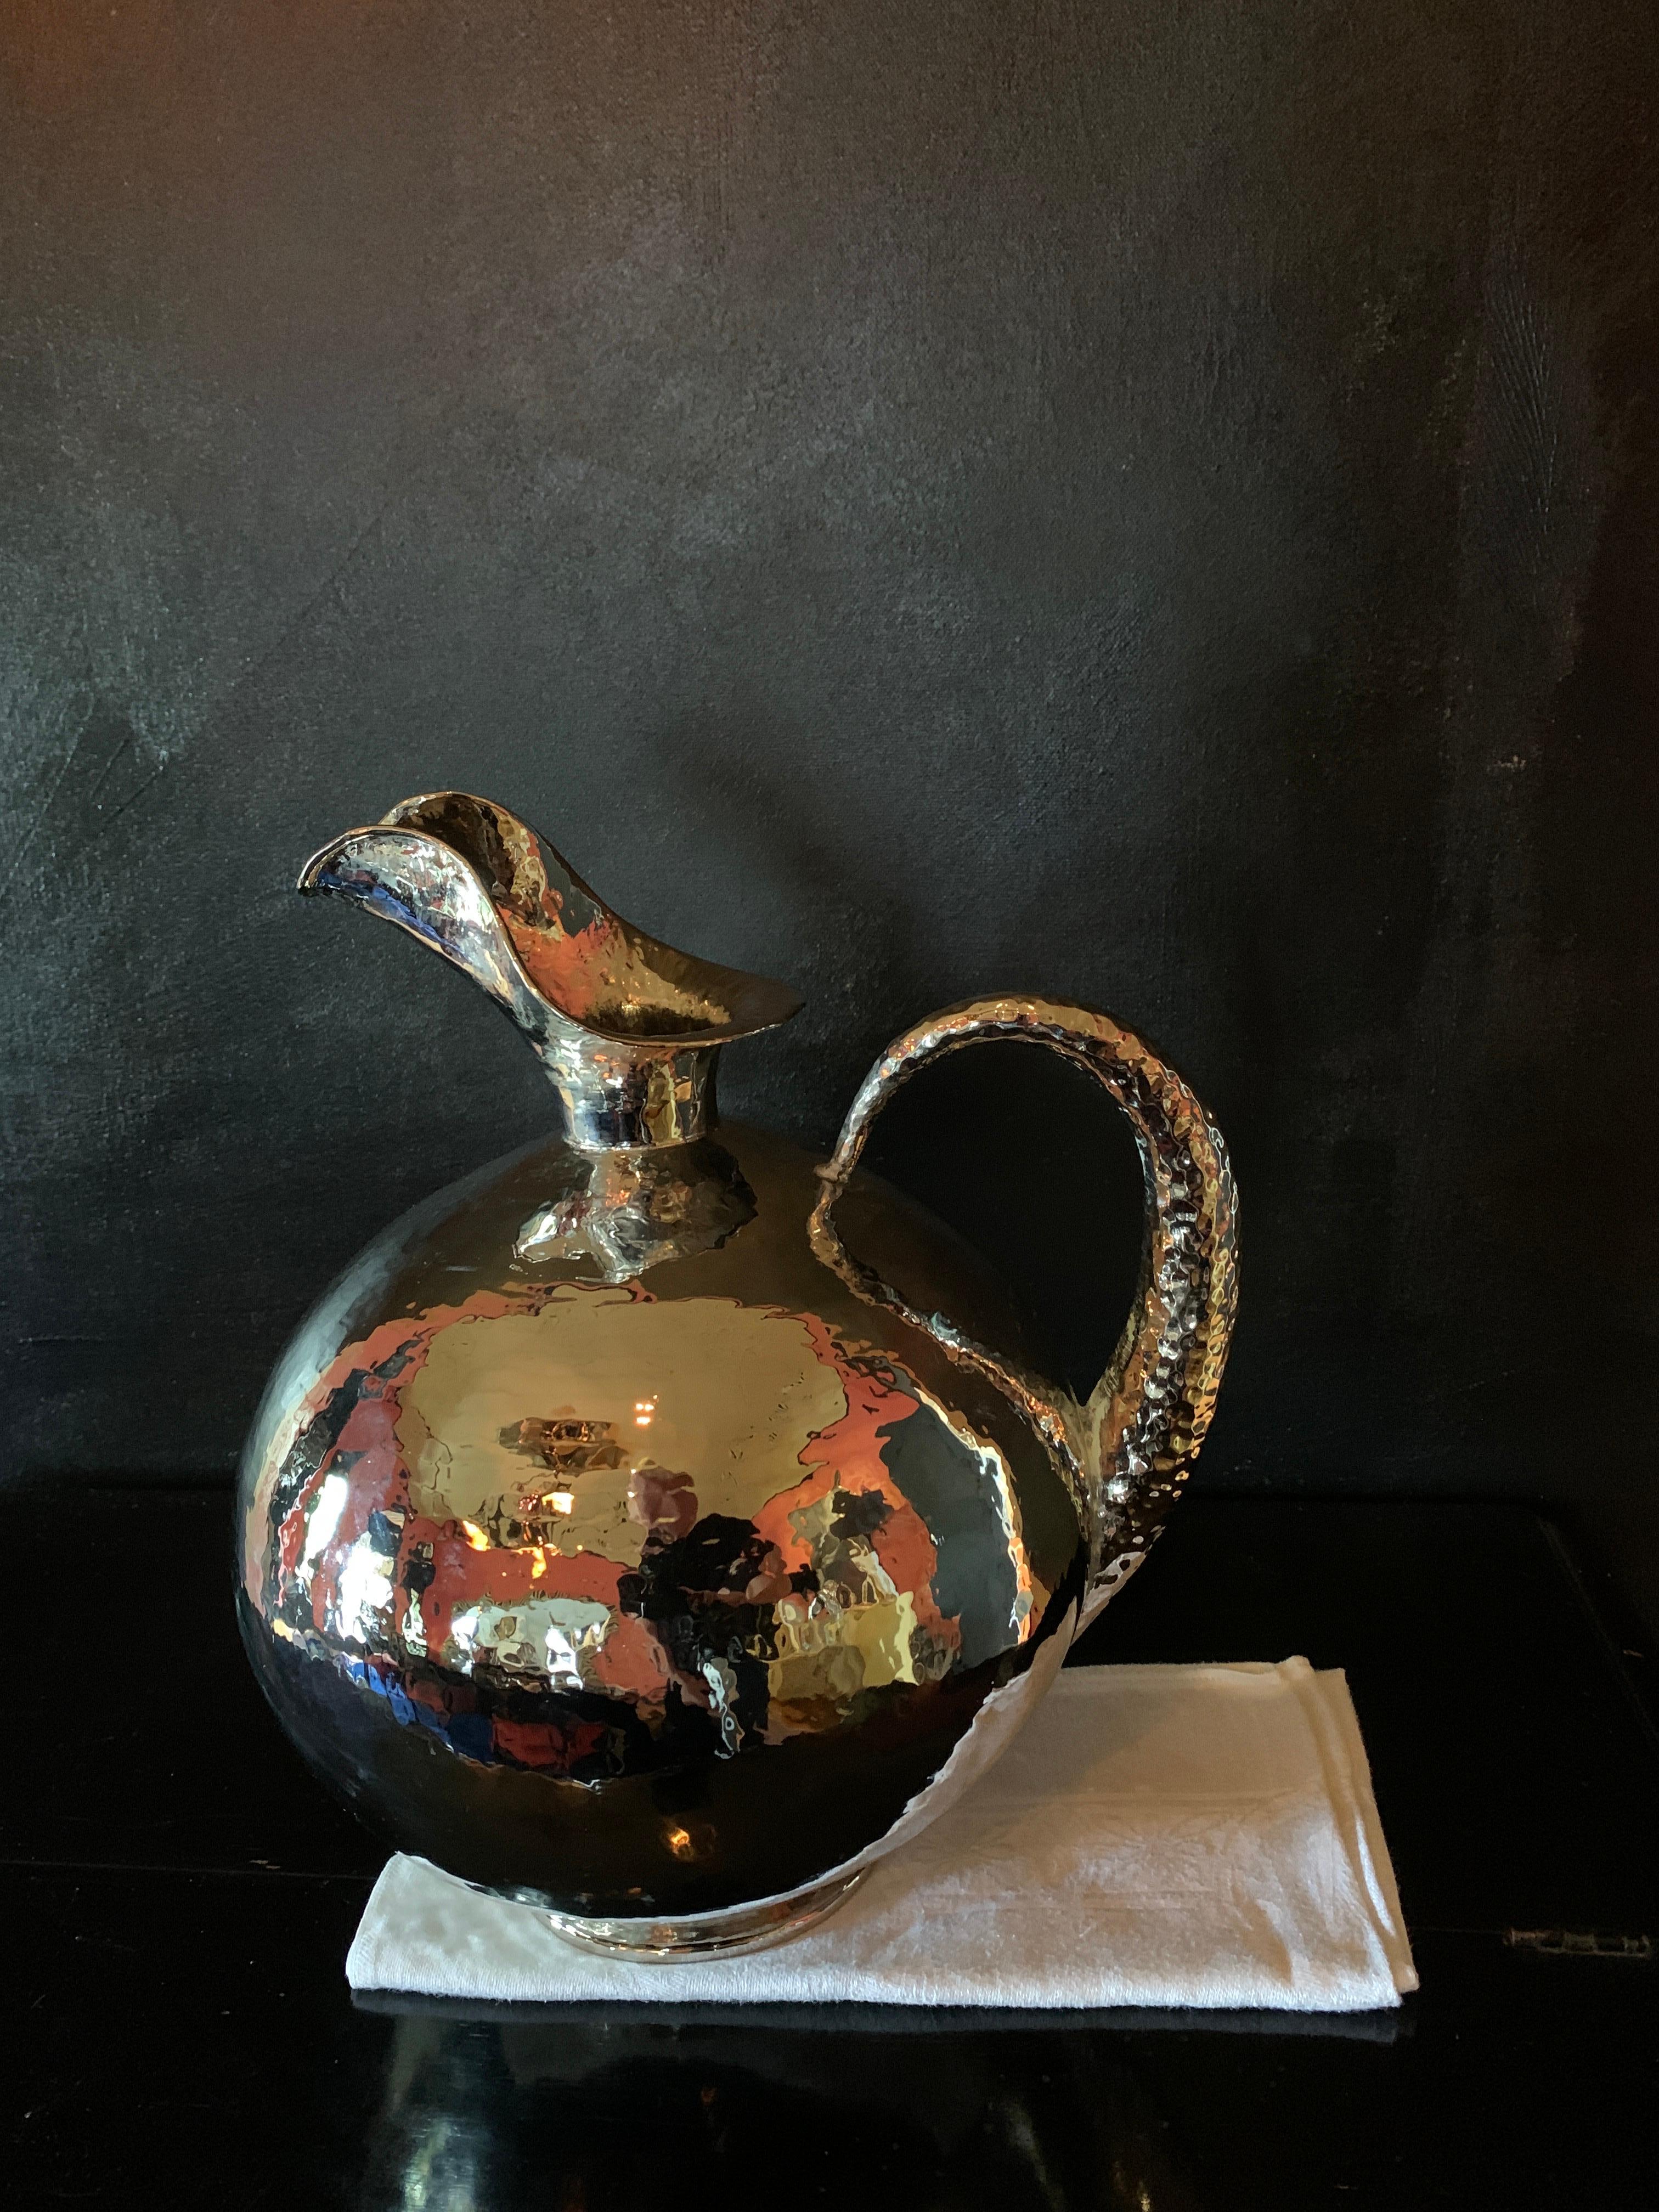 20th Century Hammered Silver Plated Urn Pitcher by Italian Designer Egidio Casagrande  For Sale